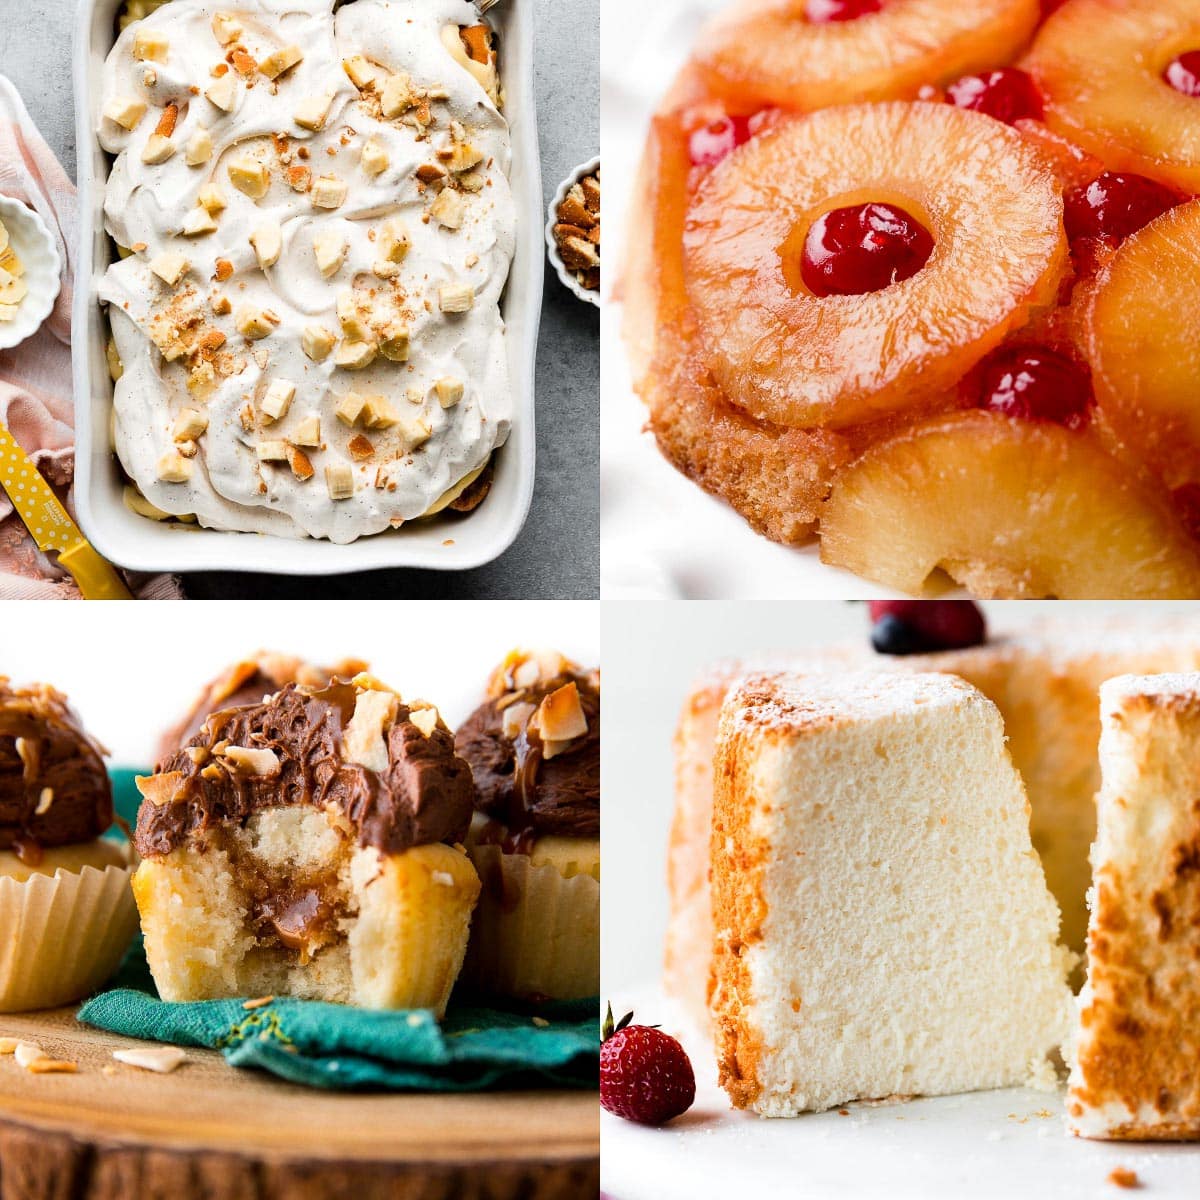 collage of dessert photos including banana pudding, pineapple upside down cake, coconut cupcakes, and angel food cake